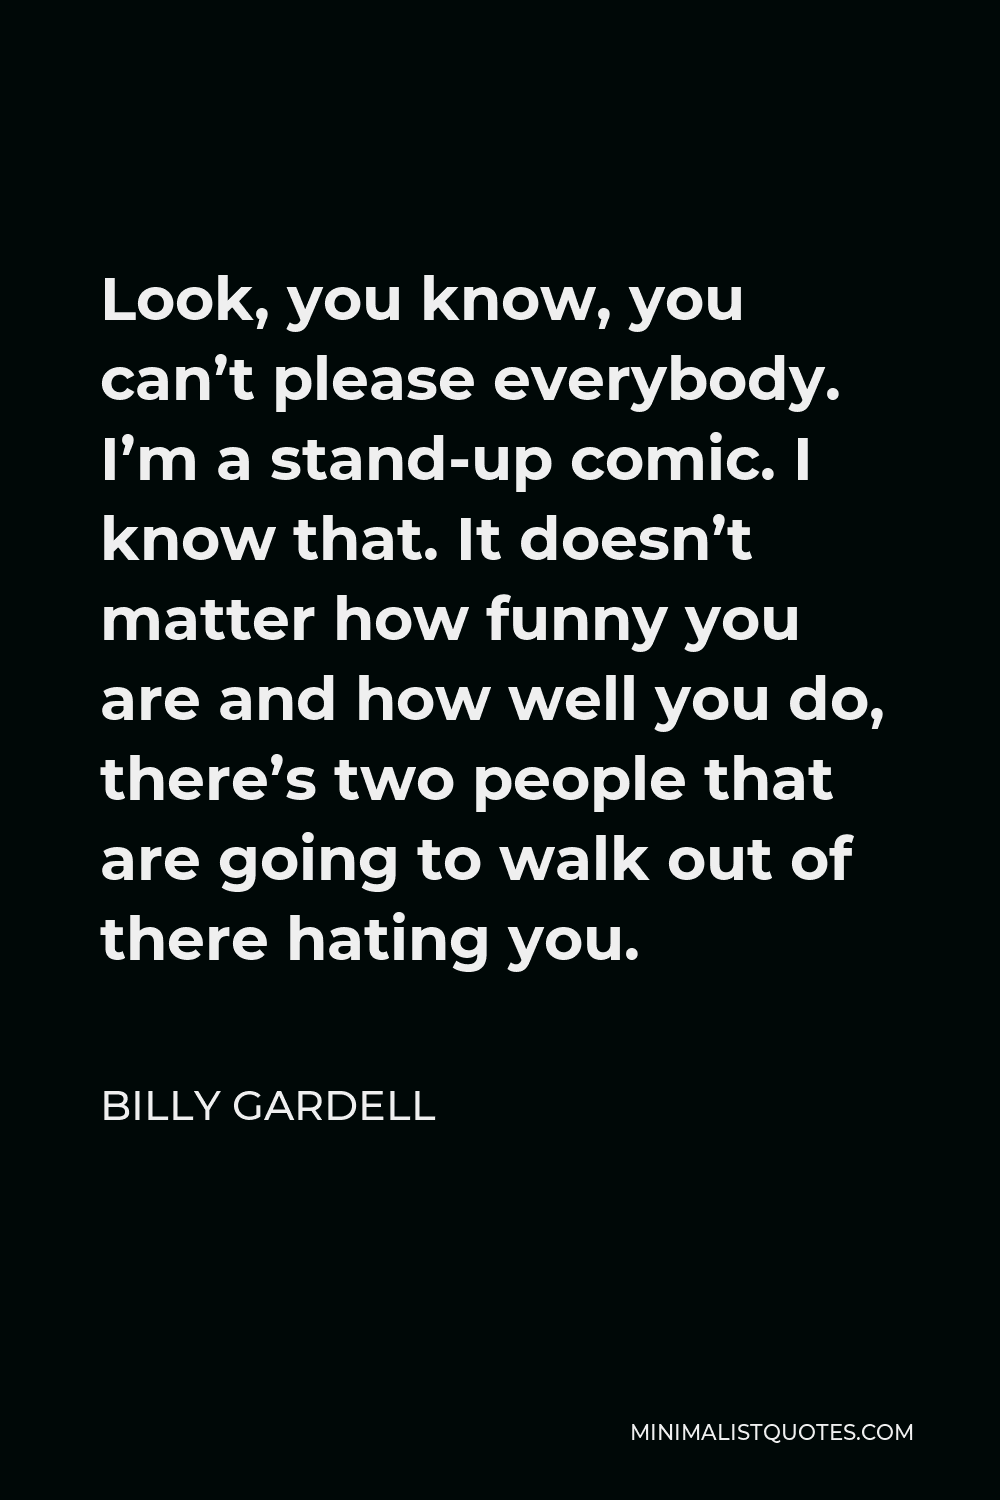 Billy Gardell Quote - Look, you know, you can’t please everybody. I’m a stand-up comic. I know that. It doesn’t matter how funny you are and how well you do, there’s two people that are going to walk out of there hating you.